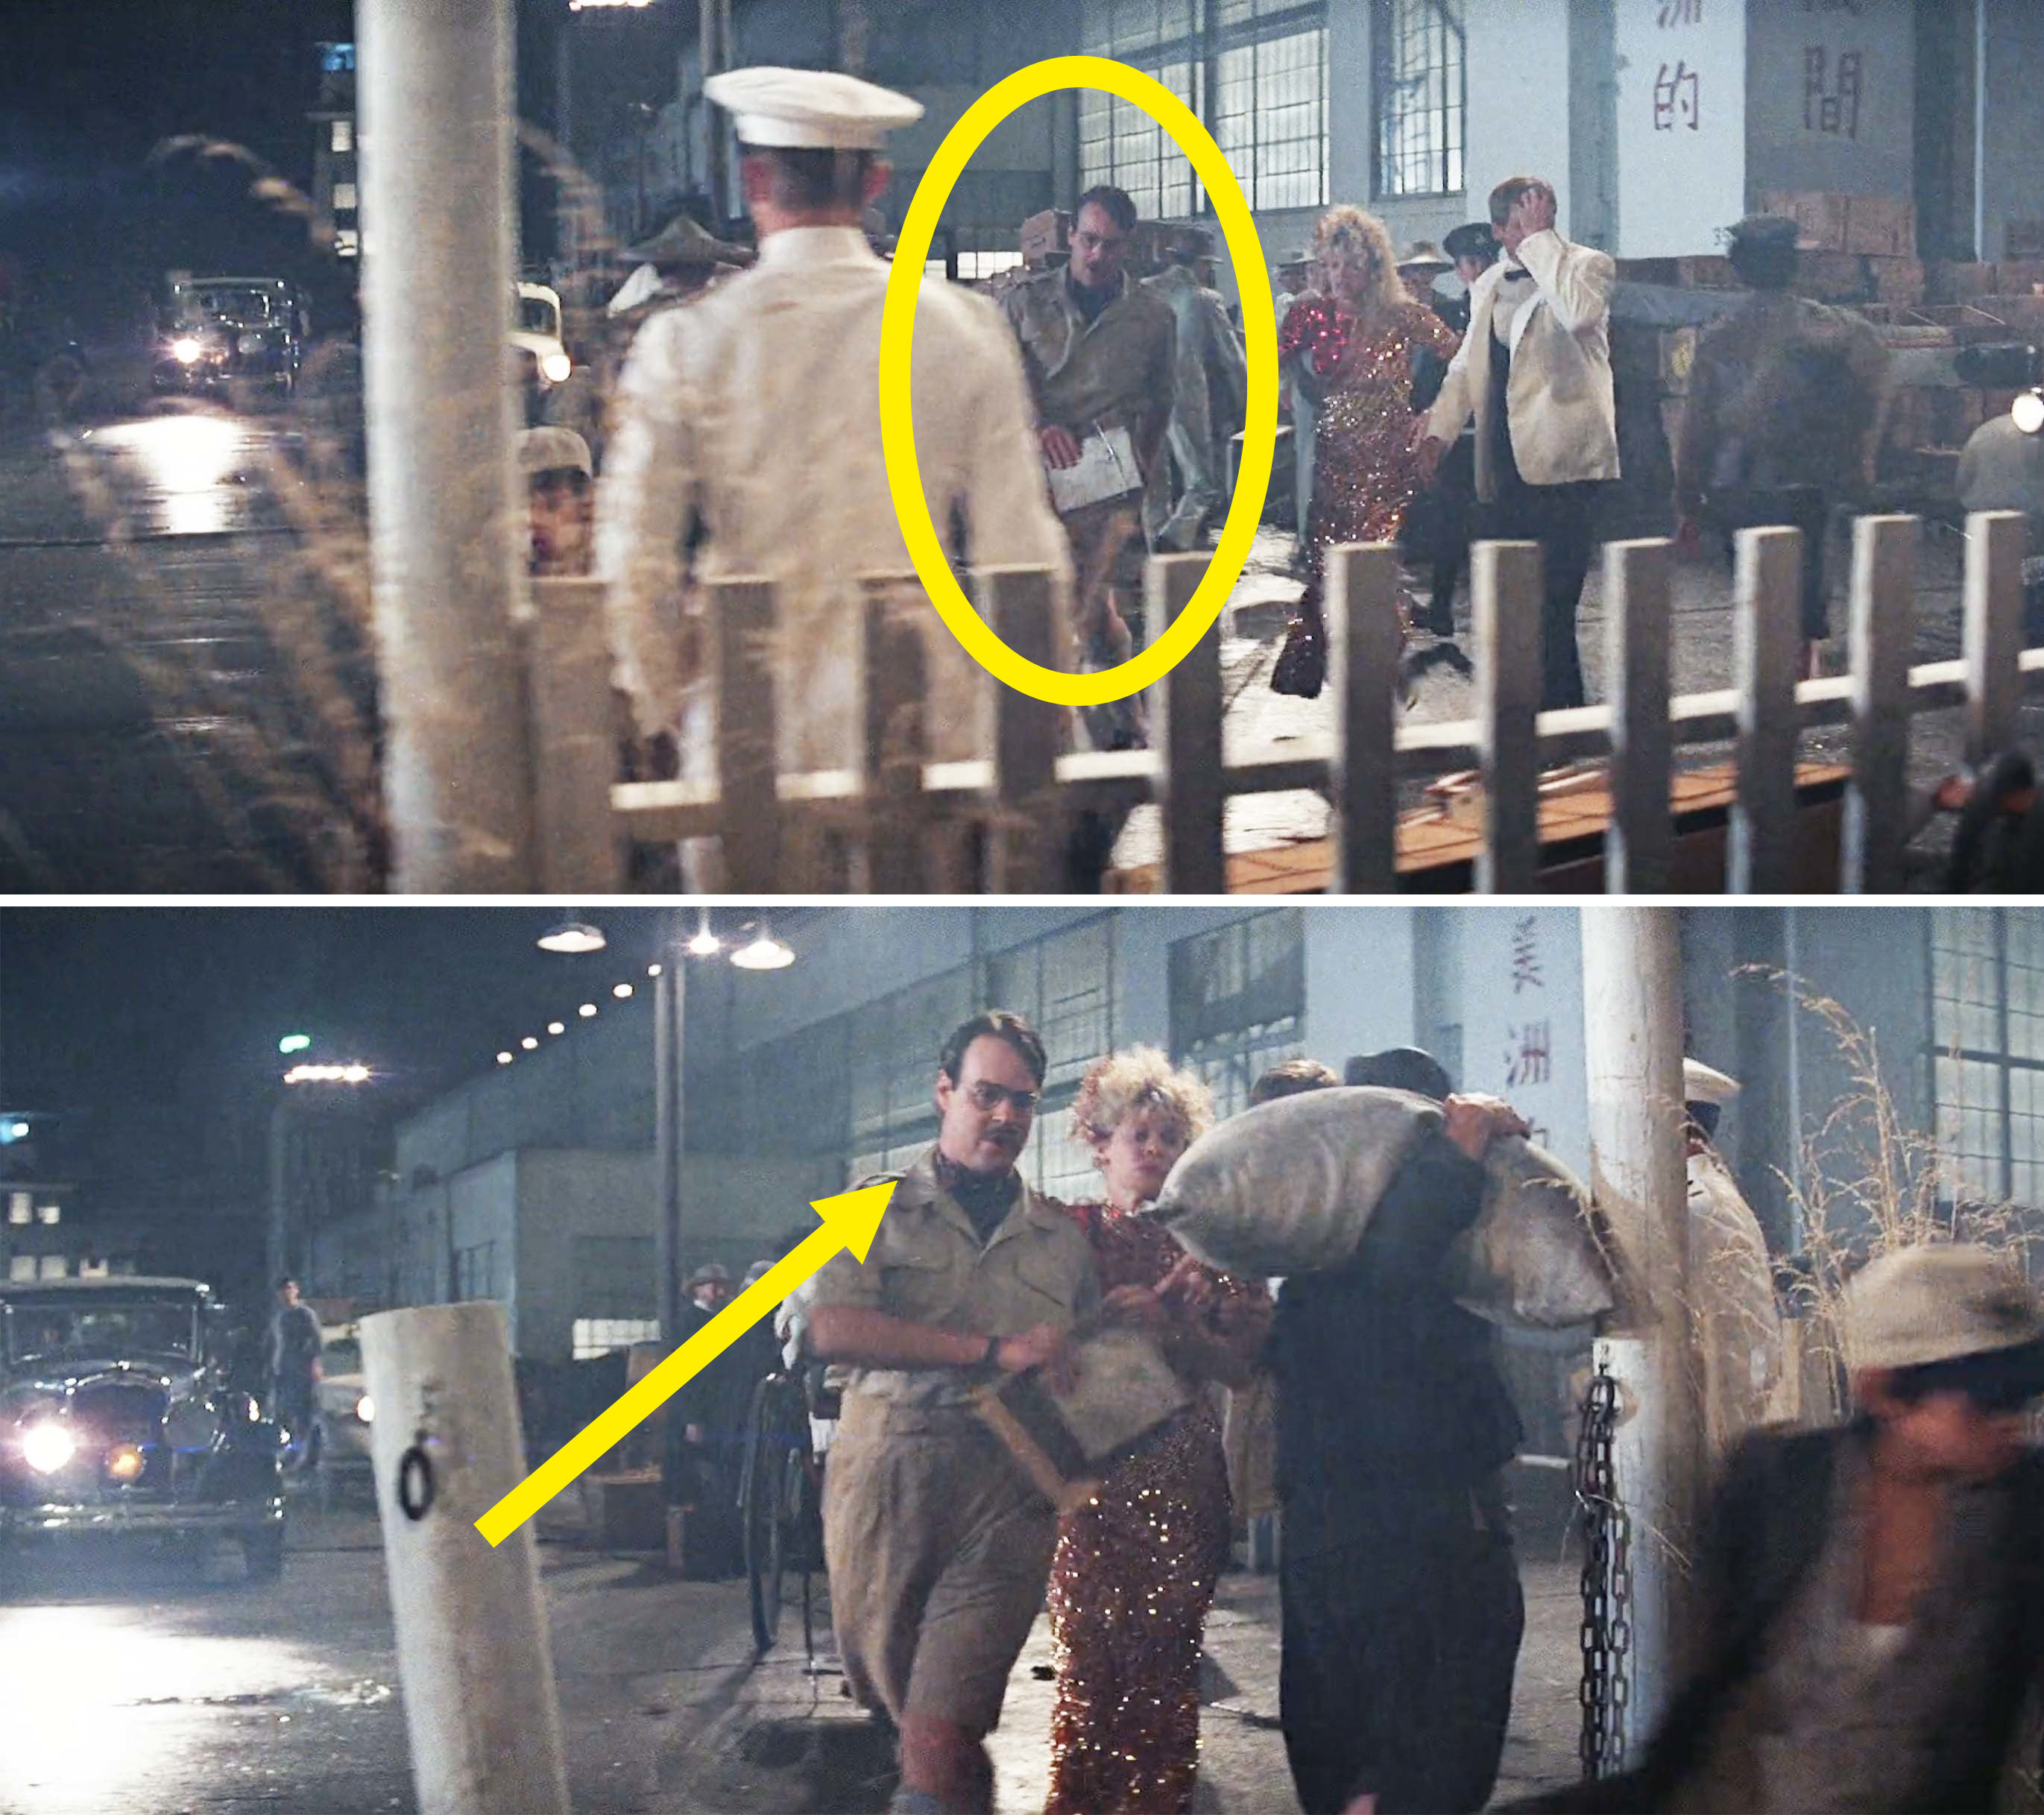 circle and arrow pointing to him in the scene